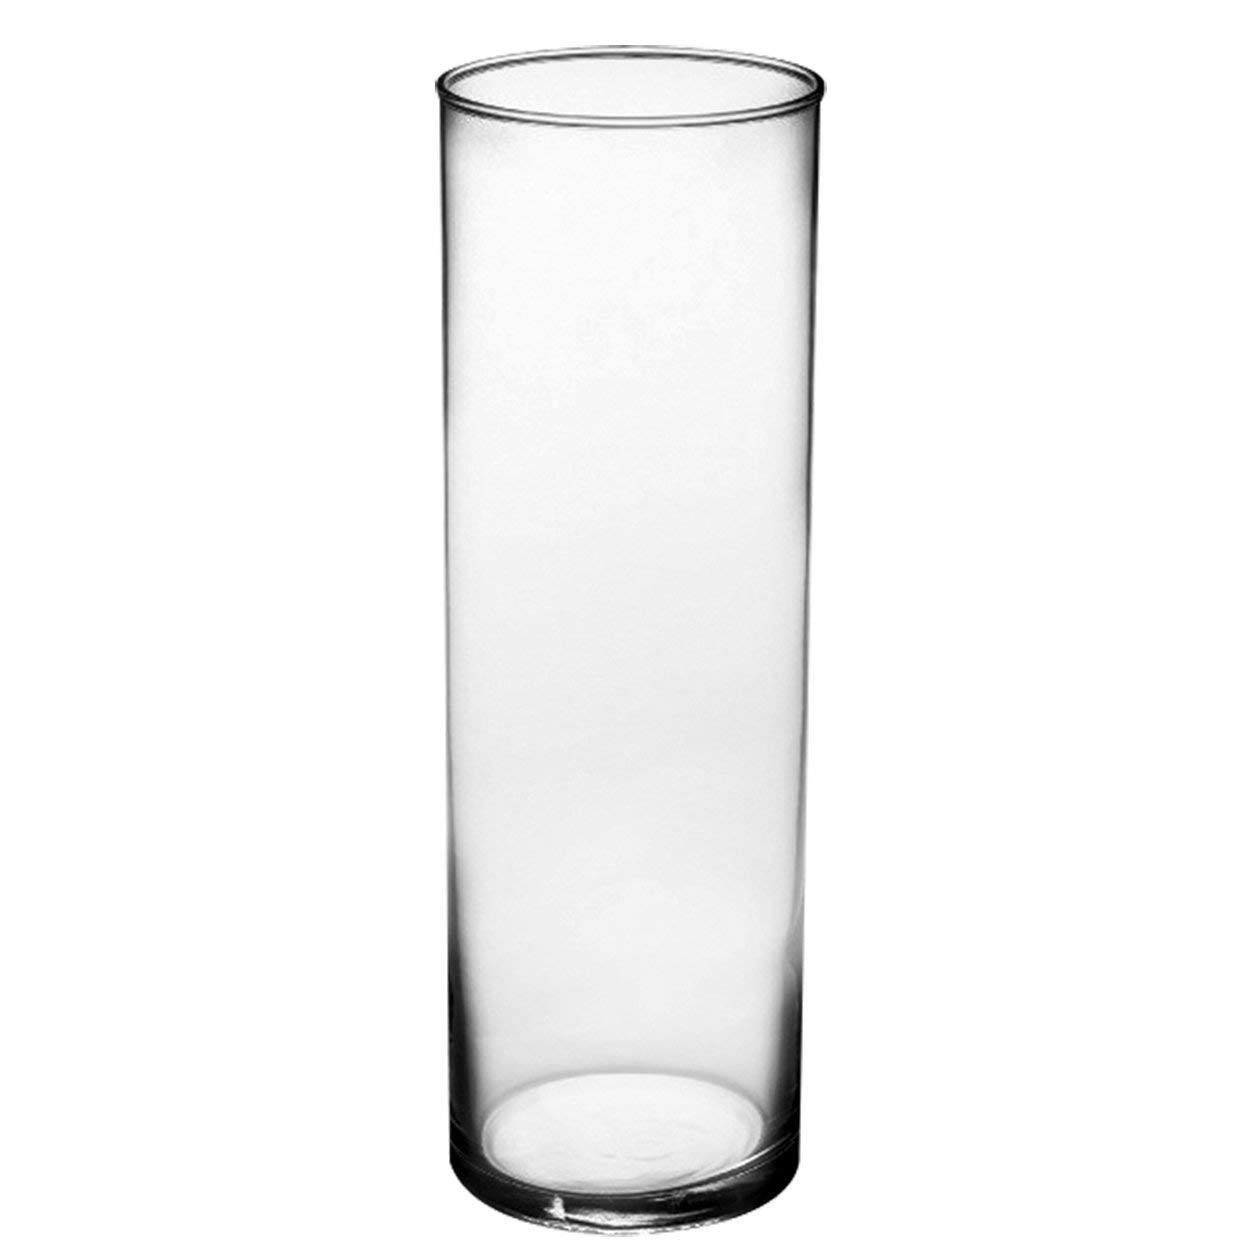 28 Trendy Modern Clear Glass Vases 2024 free download modern clear glass vases of amazon com syndicate sales 3 1 2 x 10 1 2 cylinder vase clear regarding amazon com syndicate sales 3 1 2 x 10 1 2 cylinder vase clear planters garden outdoor